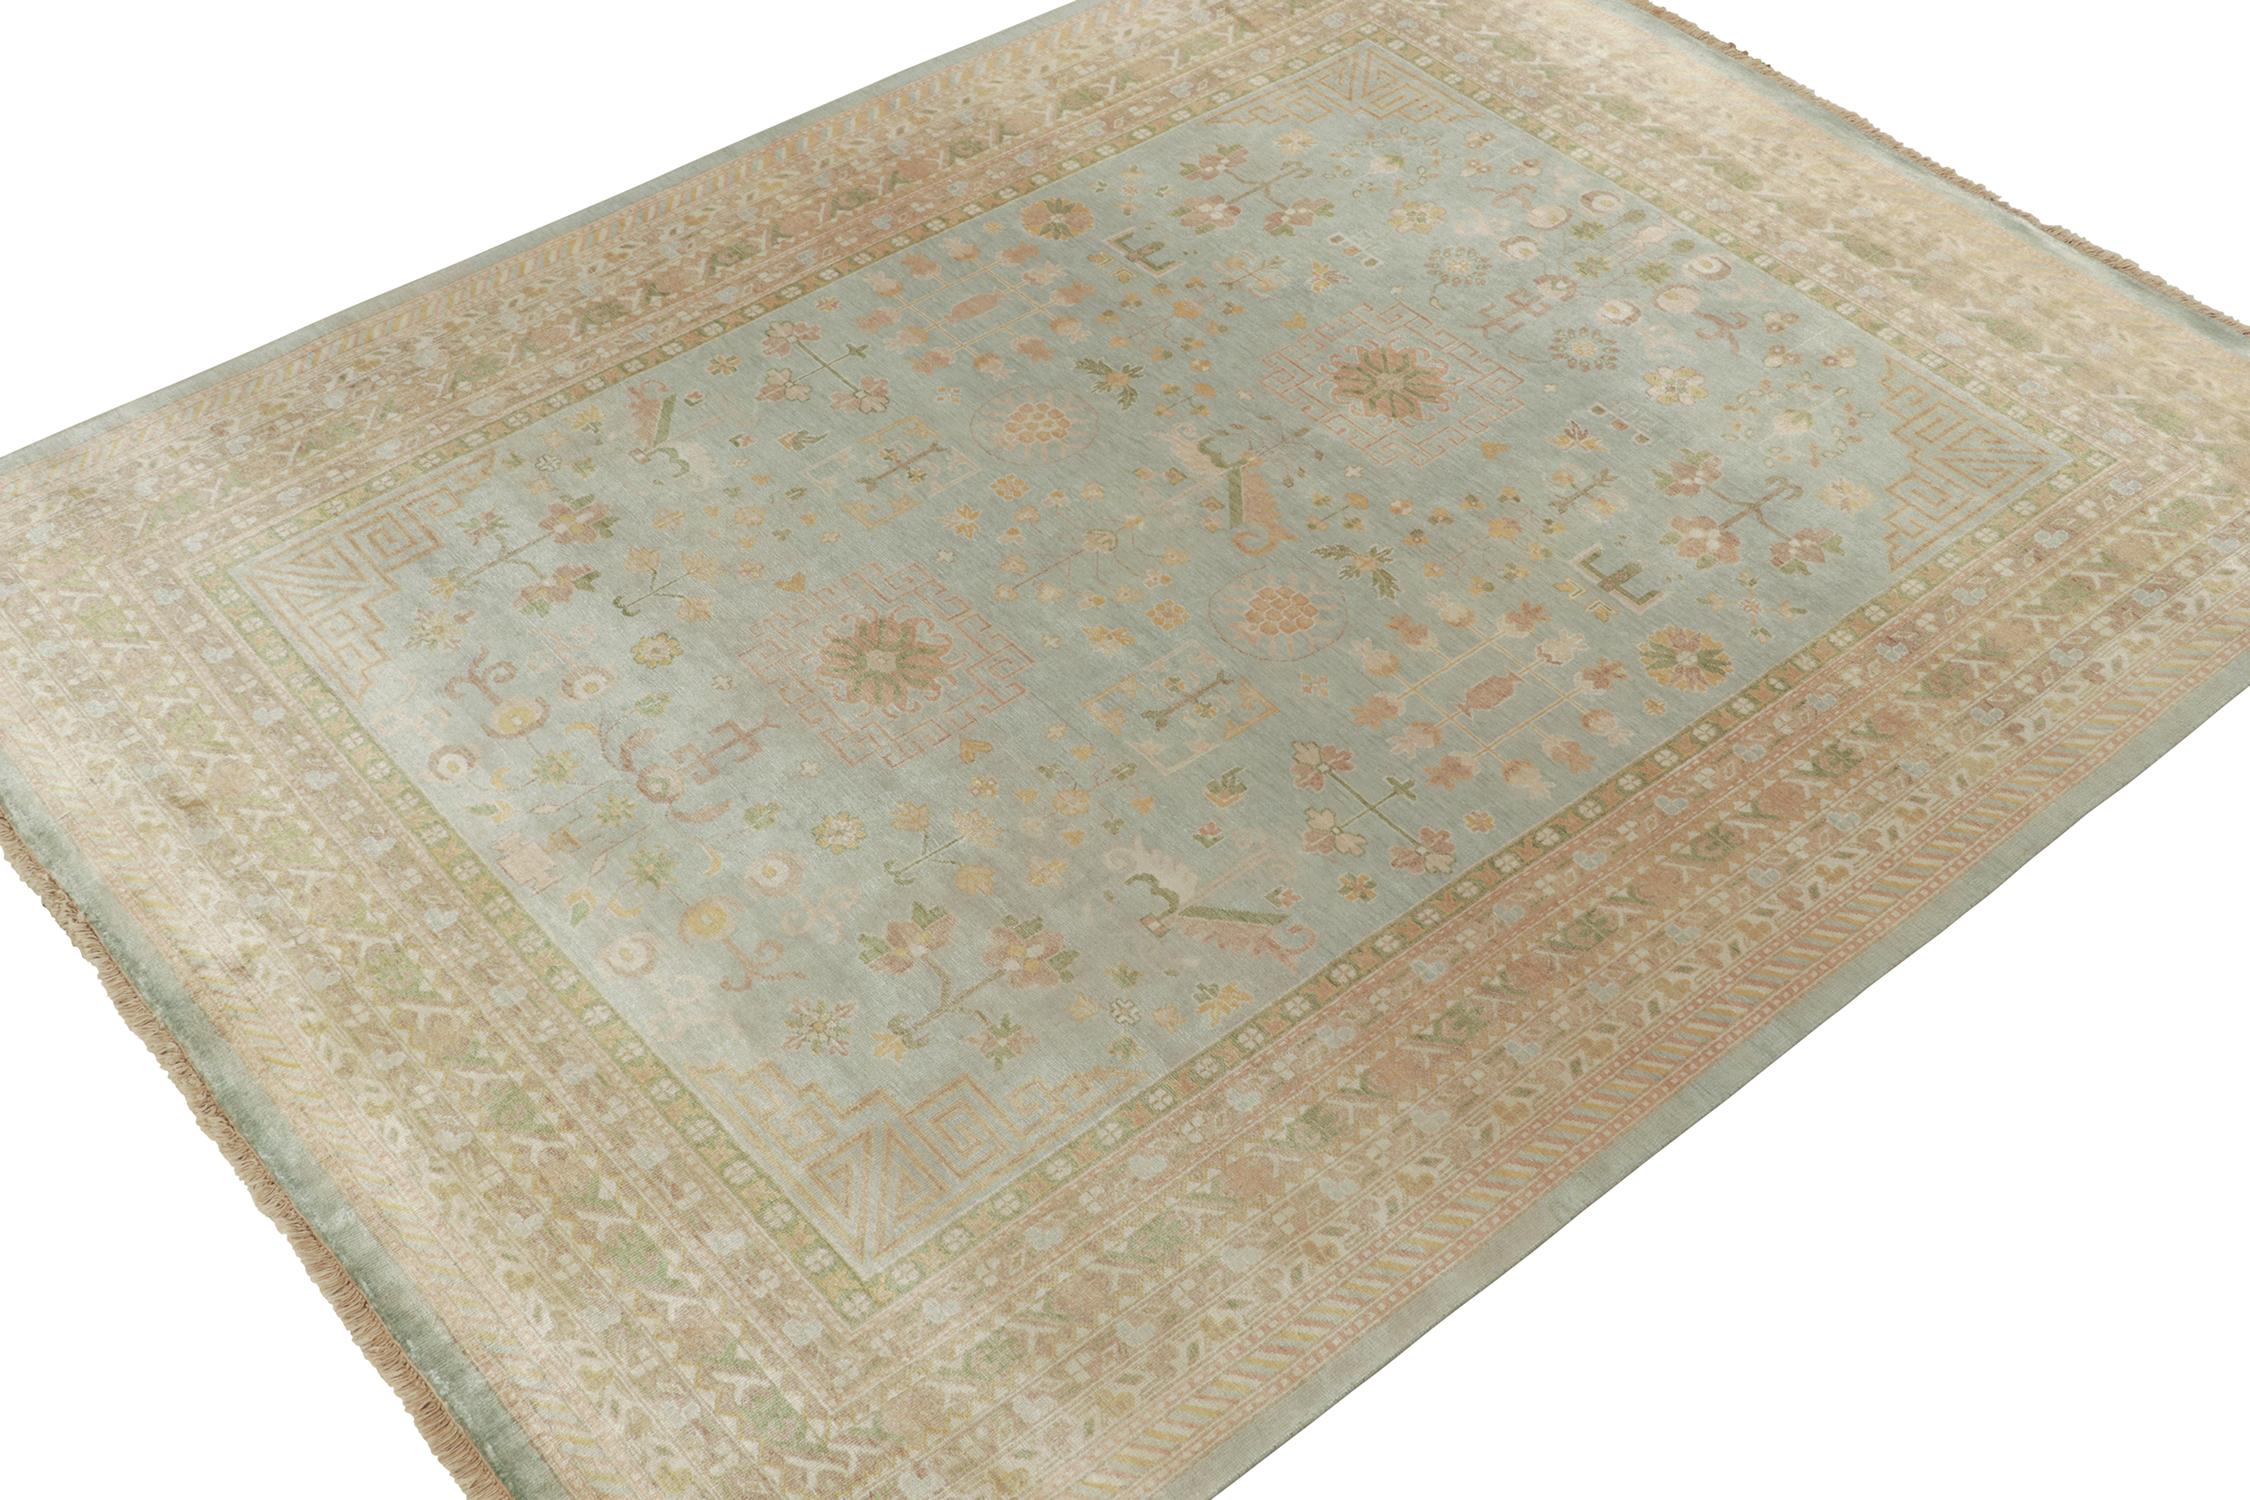 An 8x10 rug inspired from antique Khotan rug styles, from Rug & Kilim’s Modern Classics Collection. Hand knotted in silk, playing a gorgeous blue with gold, beige-brown and green in gorgeous, detailed floral patterns.
Further On the Design:
The play